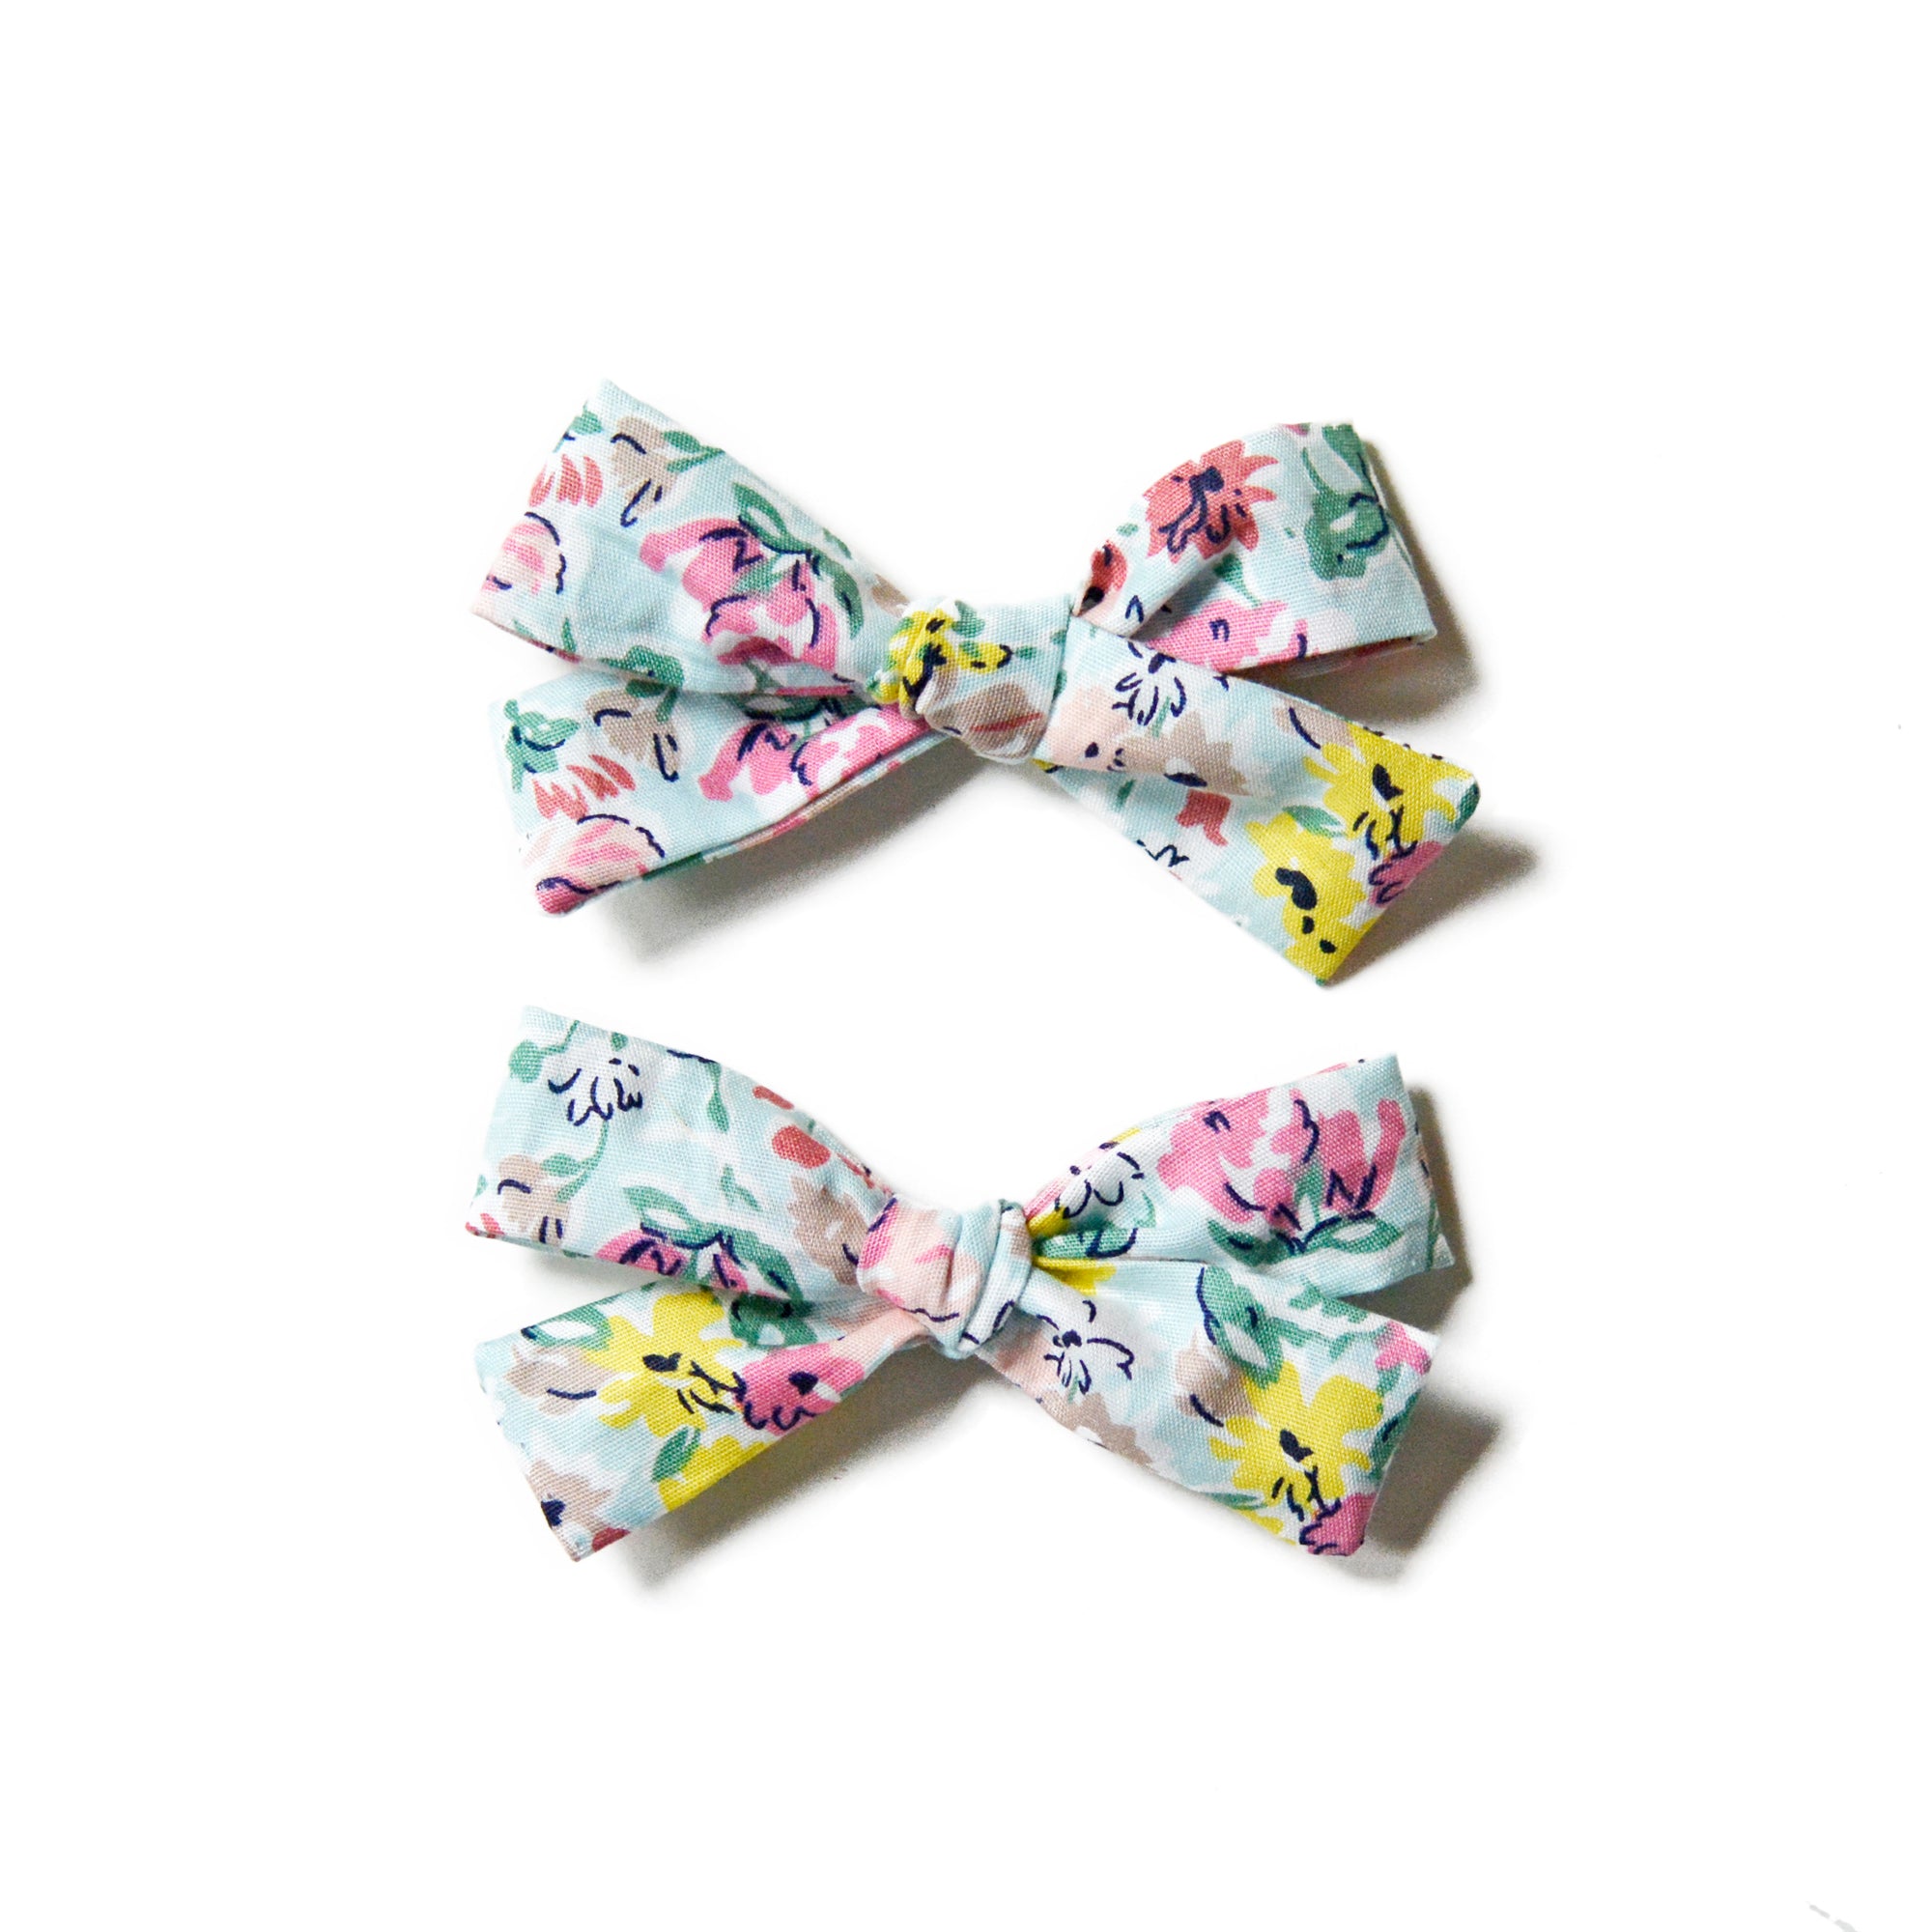 Pigtail Bow Set, Floral Girls Hair Bows, GenBow Club